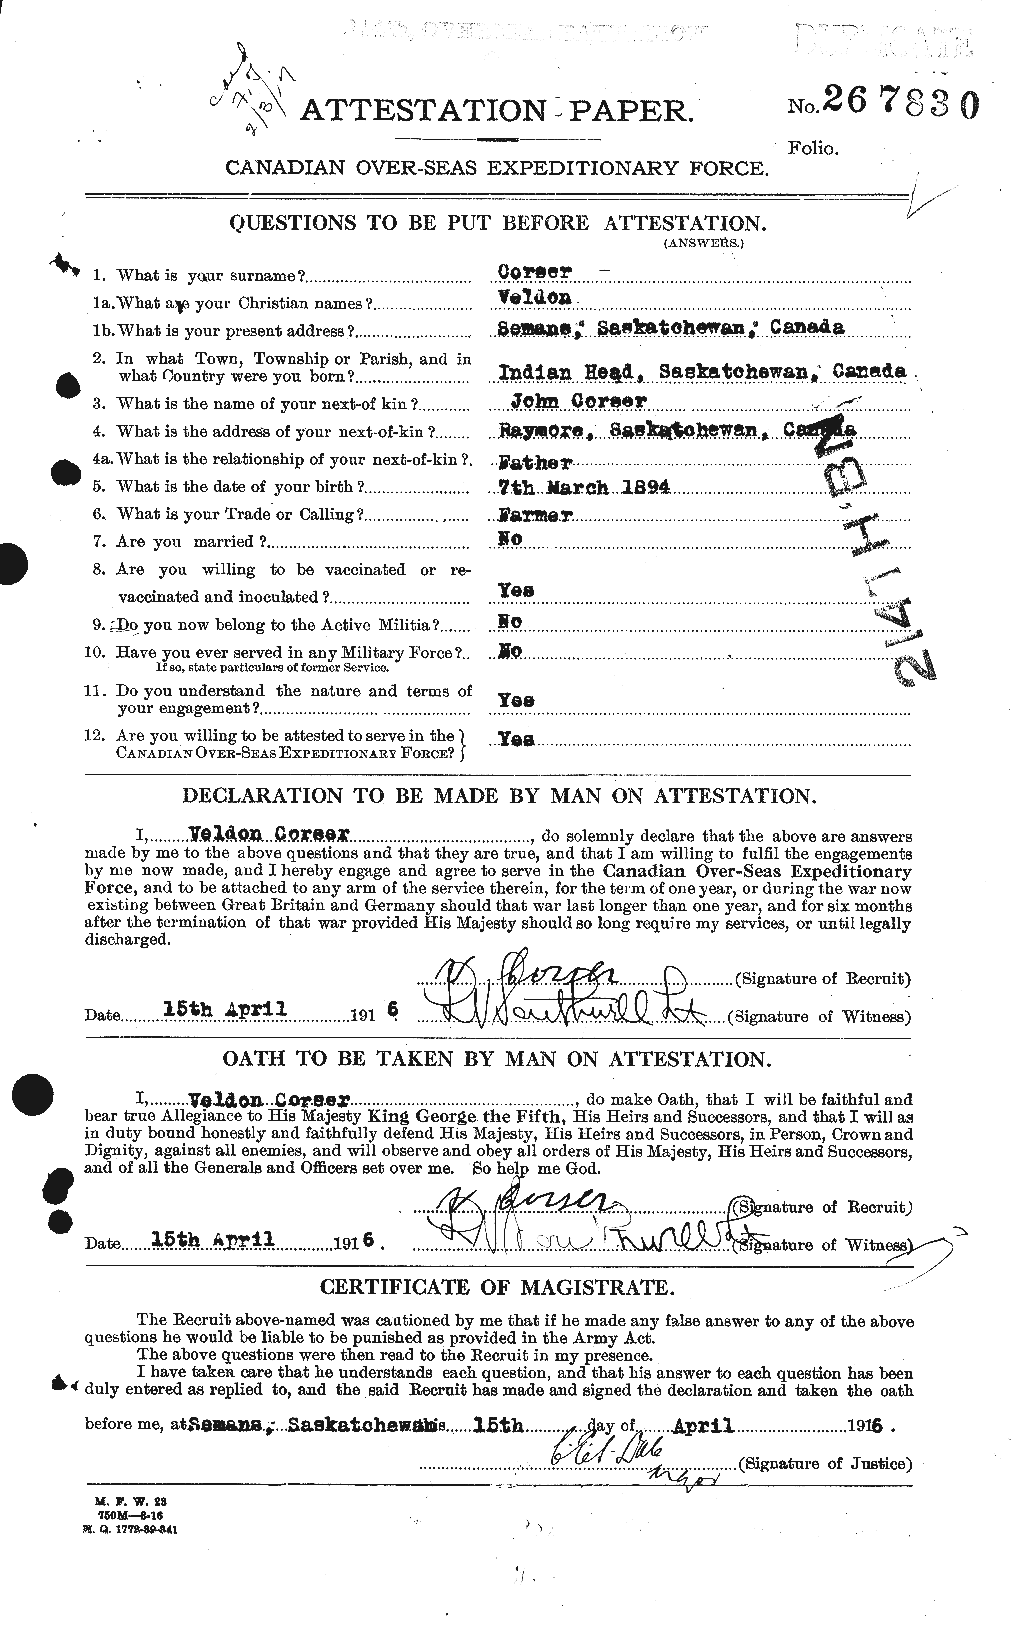 Personnel Records of the First World War - CEF 054189a